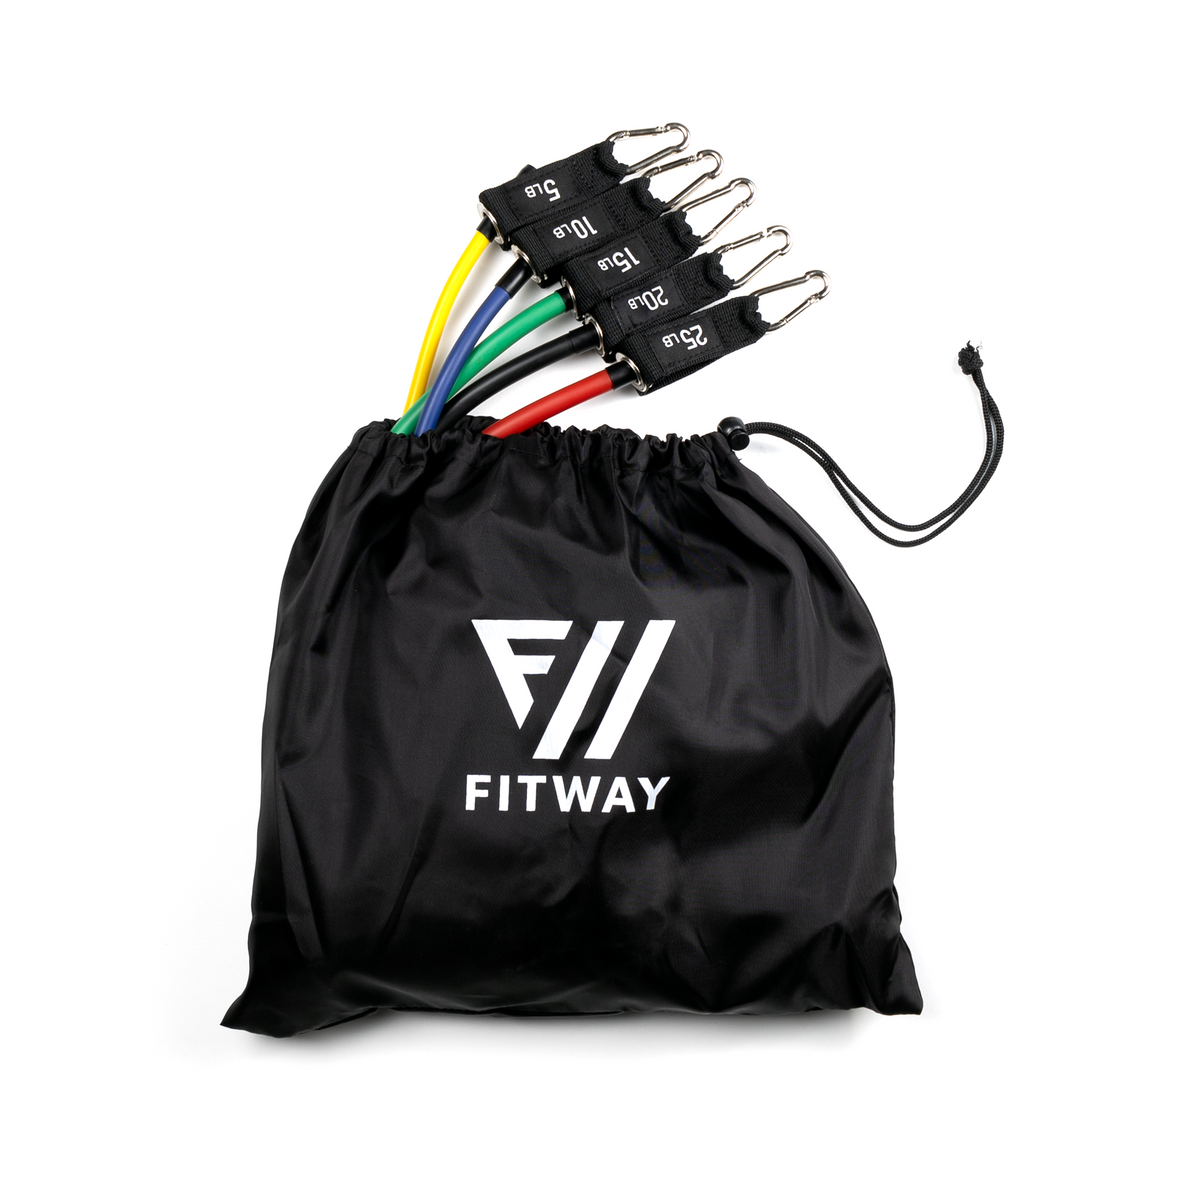 Fitway 12 piece Resistance Training System